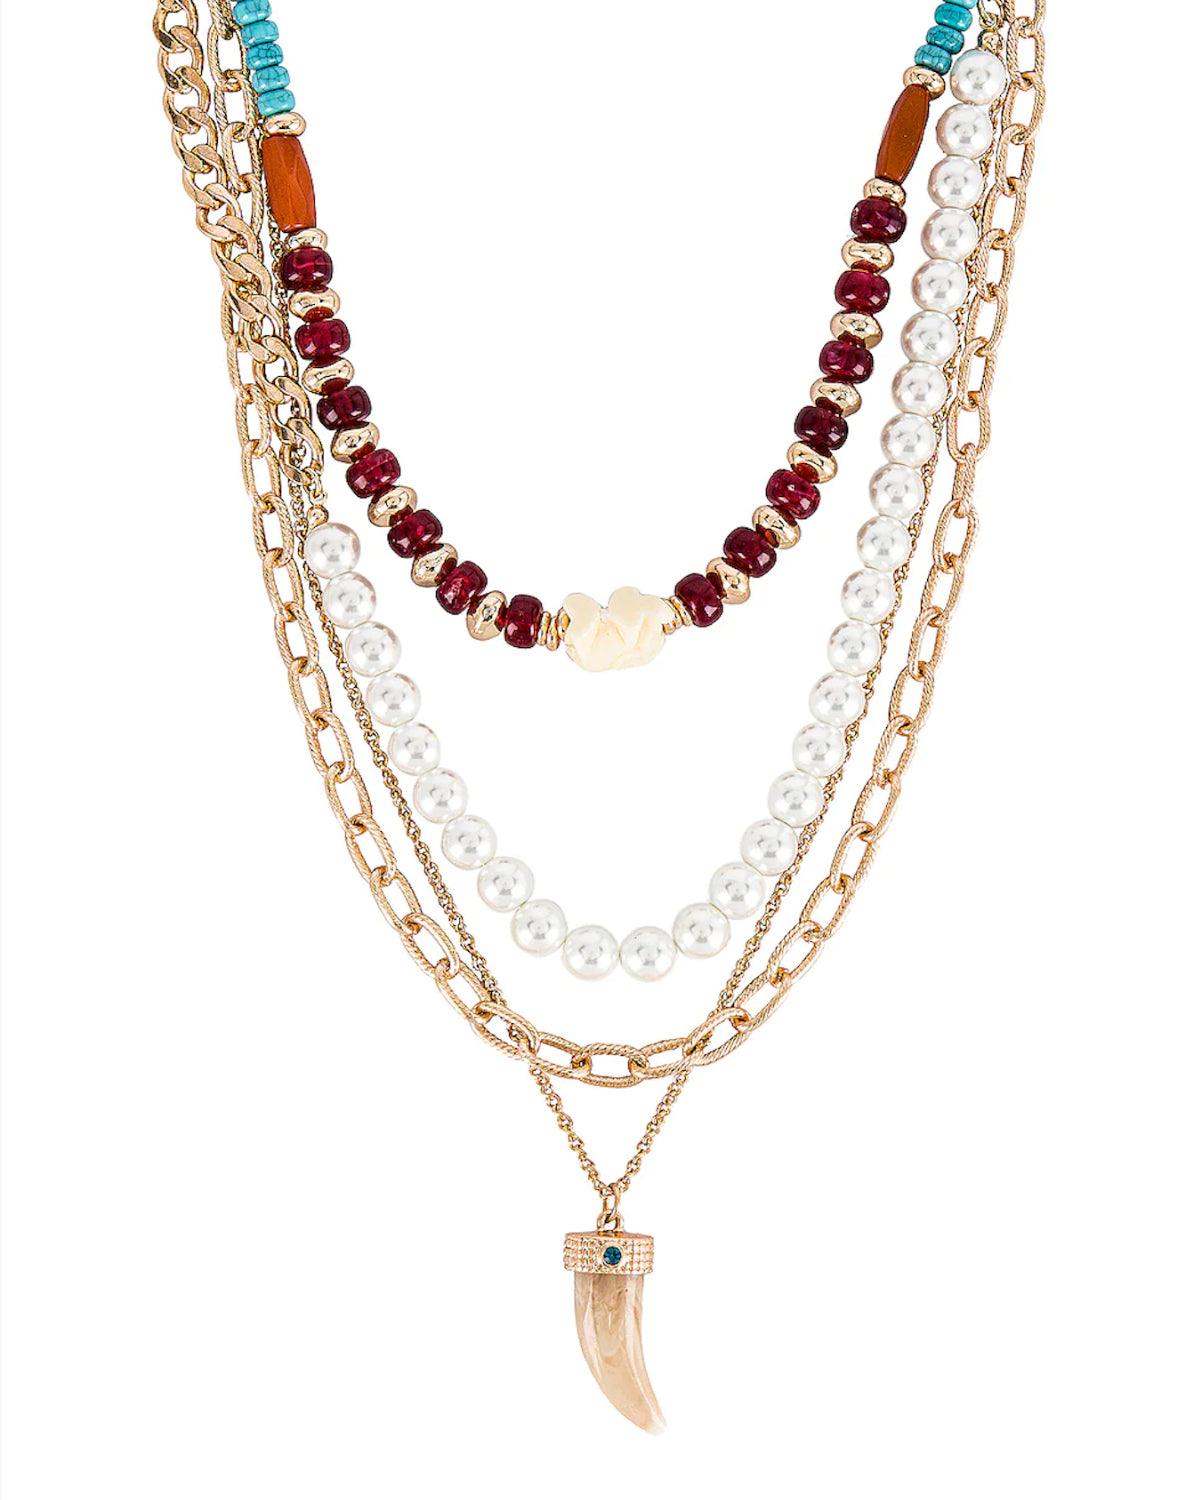 WESTERN LAYERED NECKLACE IN MULTI - 8 Other Reasons